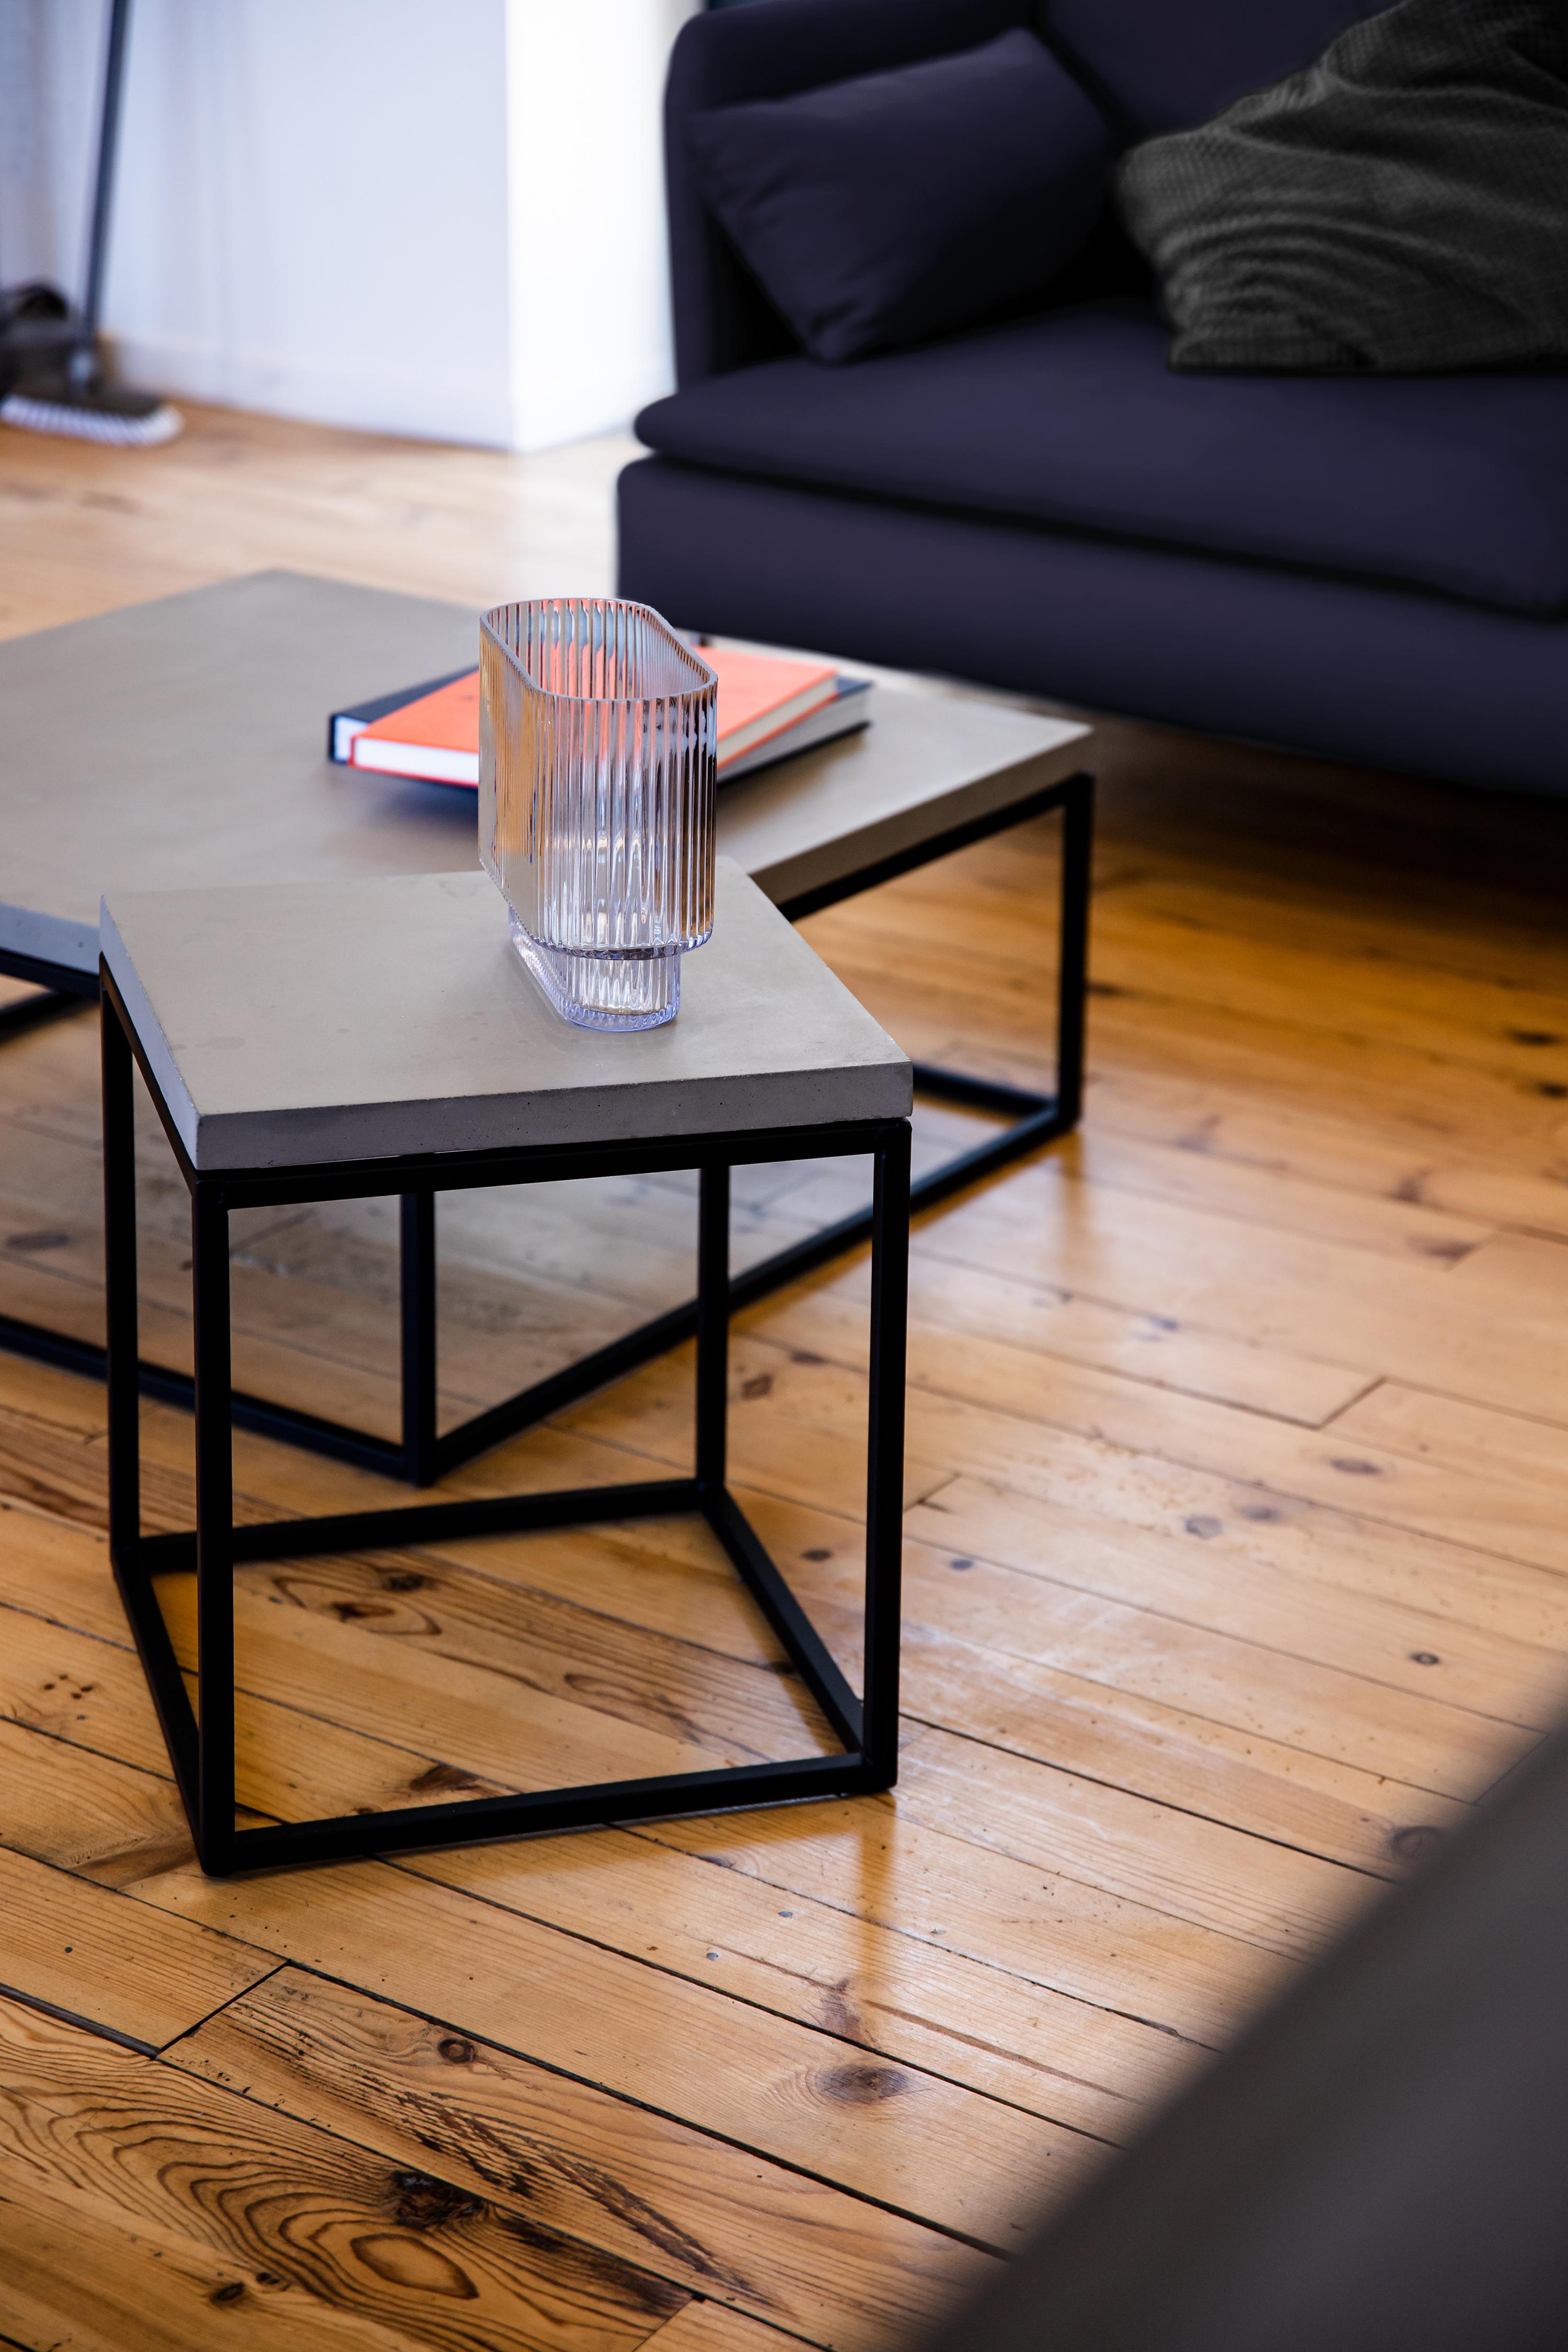 A side table with a minimalist design to use as a complement to your coffee table.
Some will use it as a bedside table. Which is also a good idea.
As its name suggests, the black edition has a metal base covered with a black epoxy velvet paint.